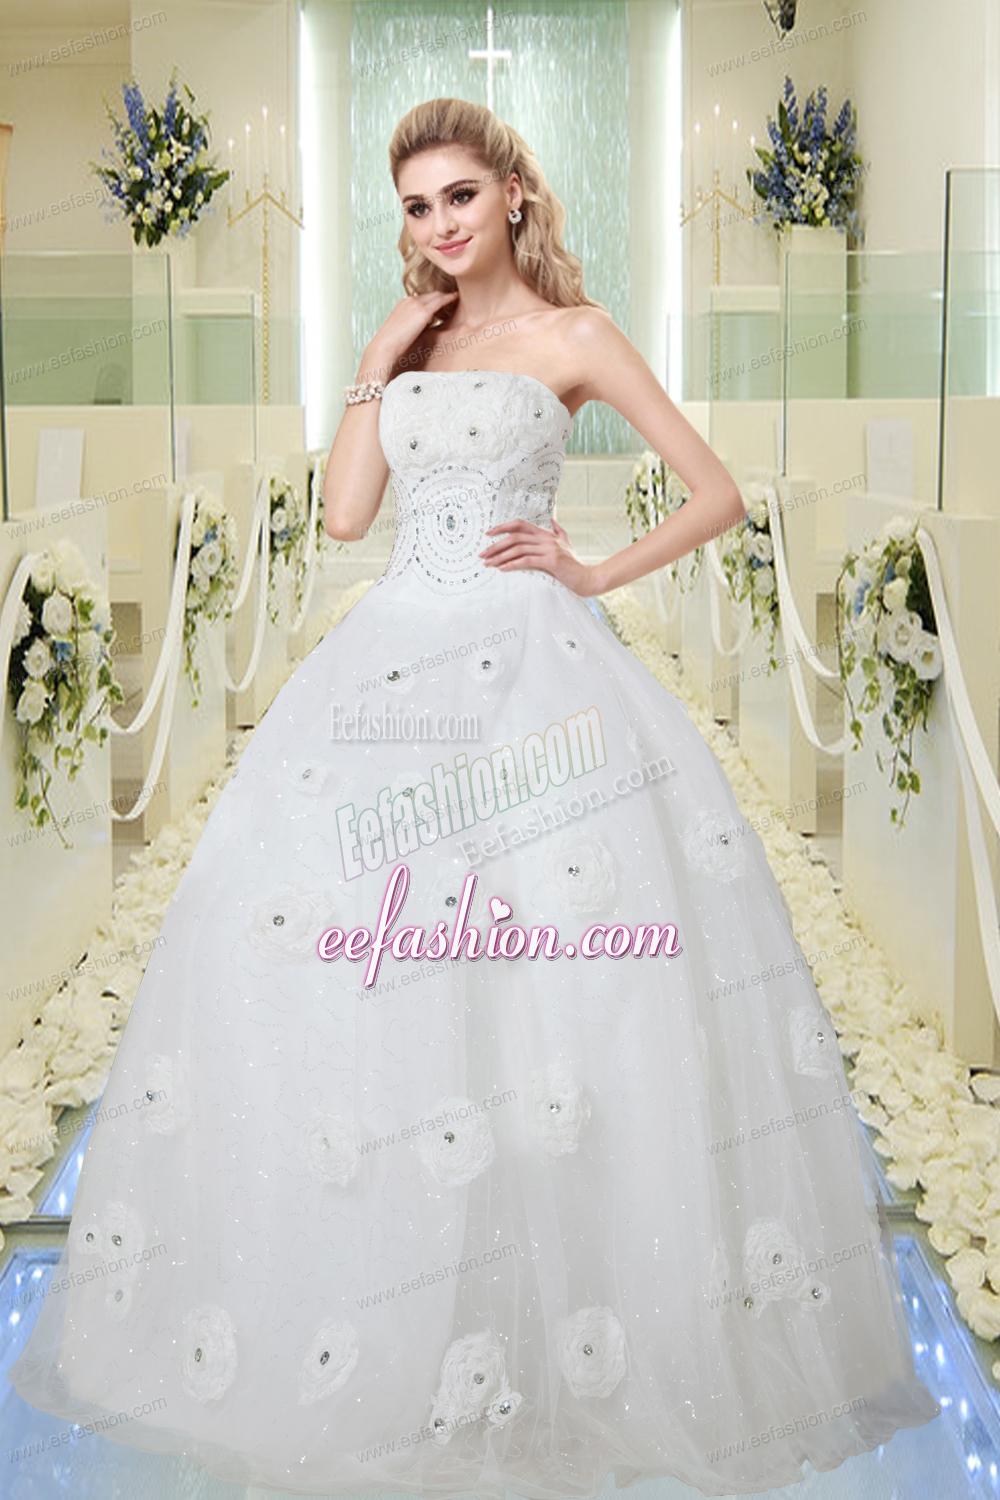 Hot Sale Ball Gown Strapless Wedding Dresses with Beading